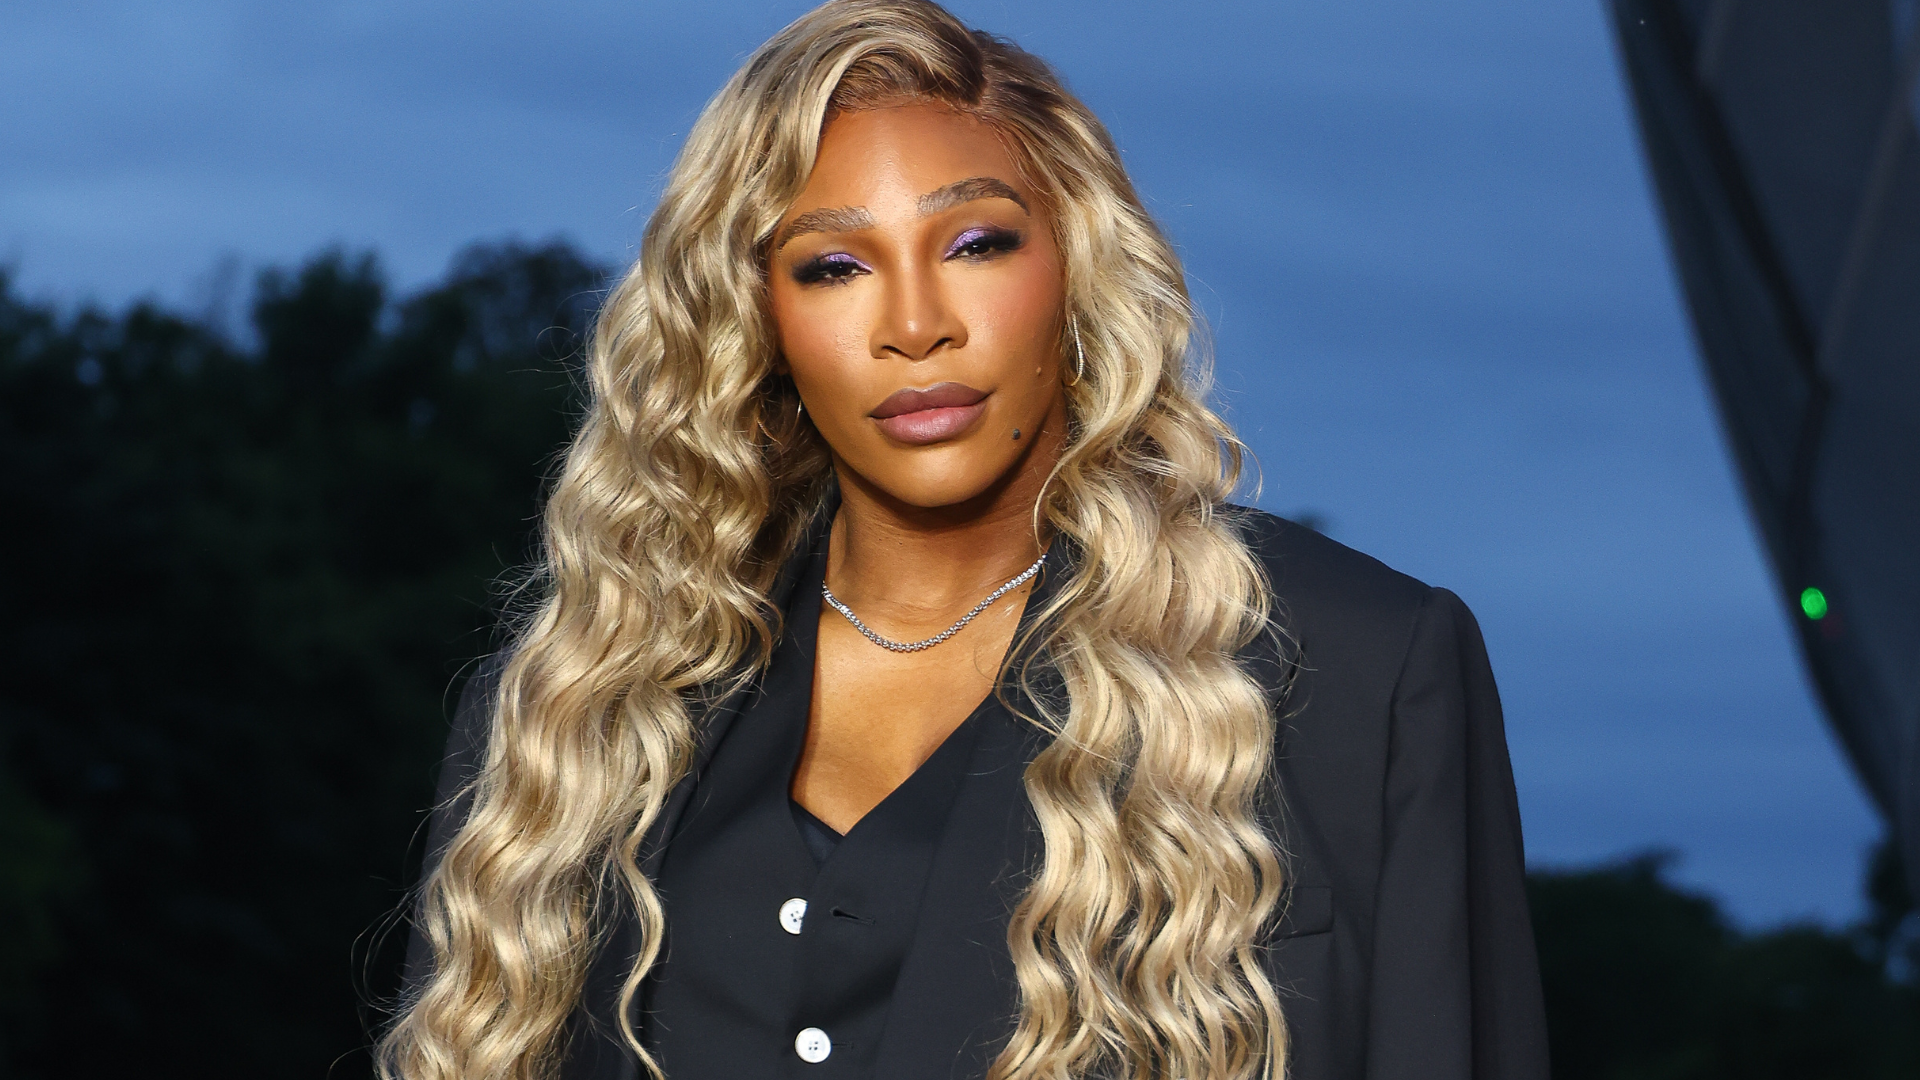 I'm In Love With Serena Williams' All-Black Louis Vuitton Suit